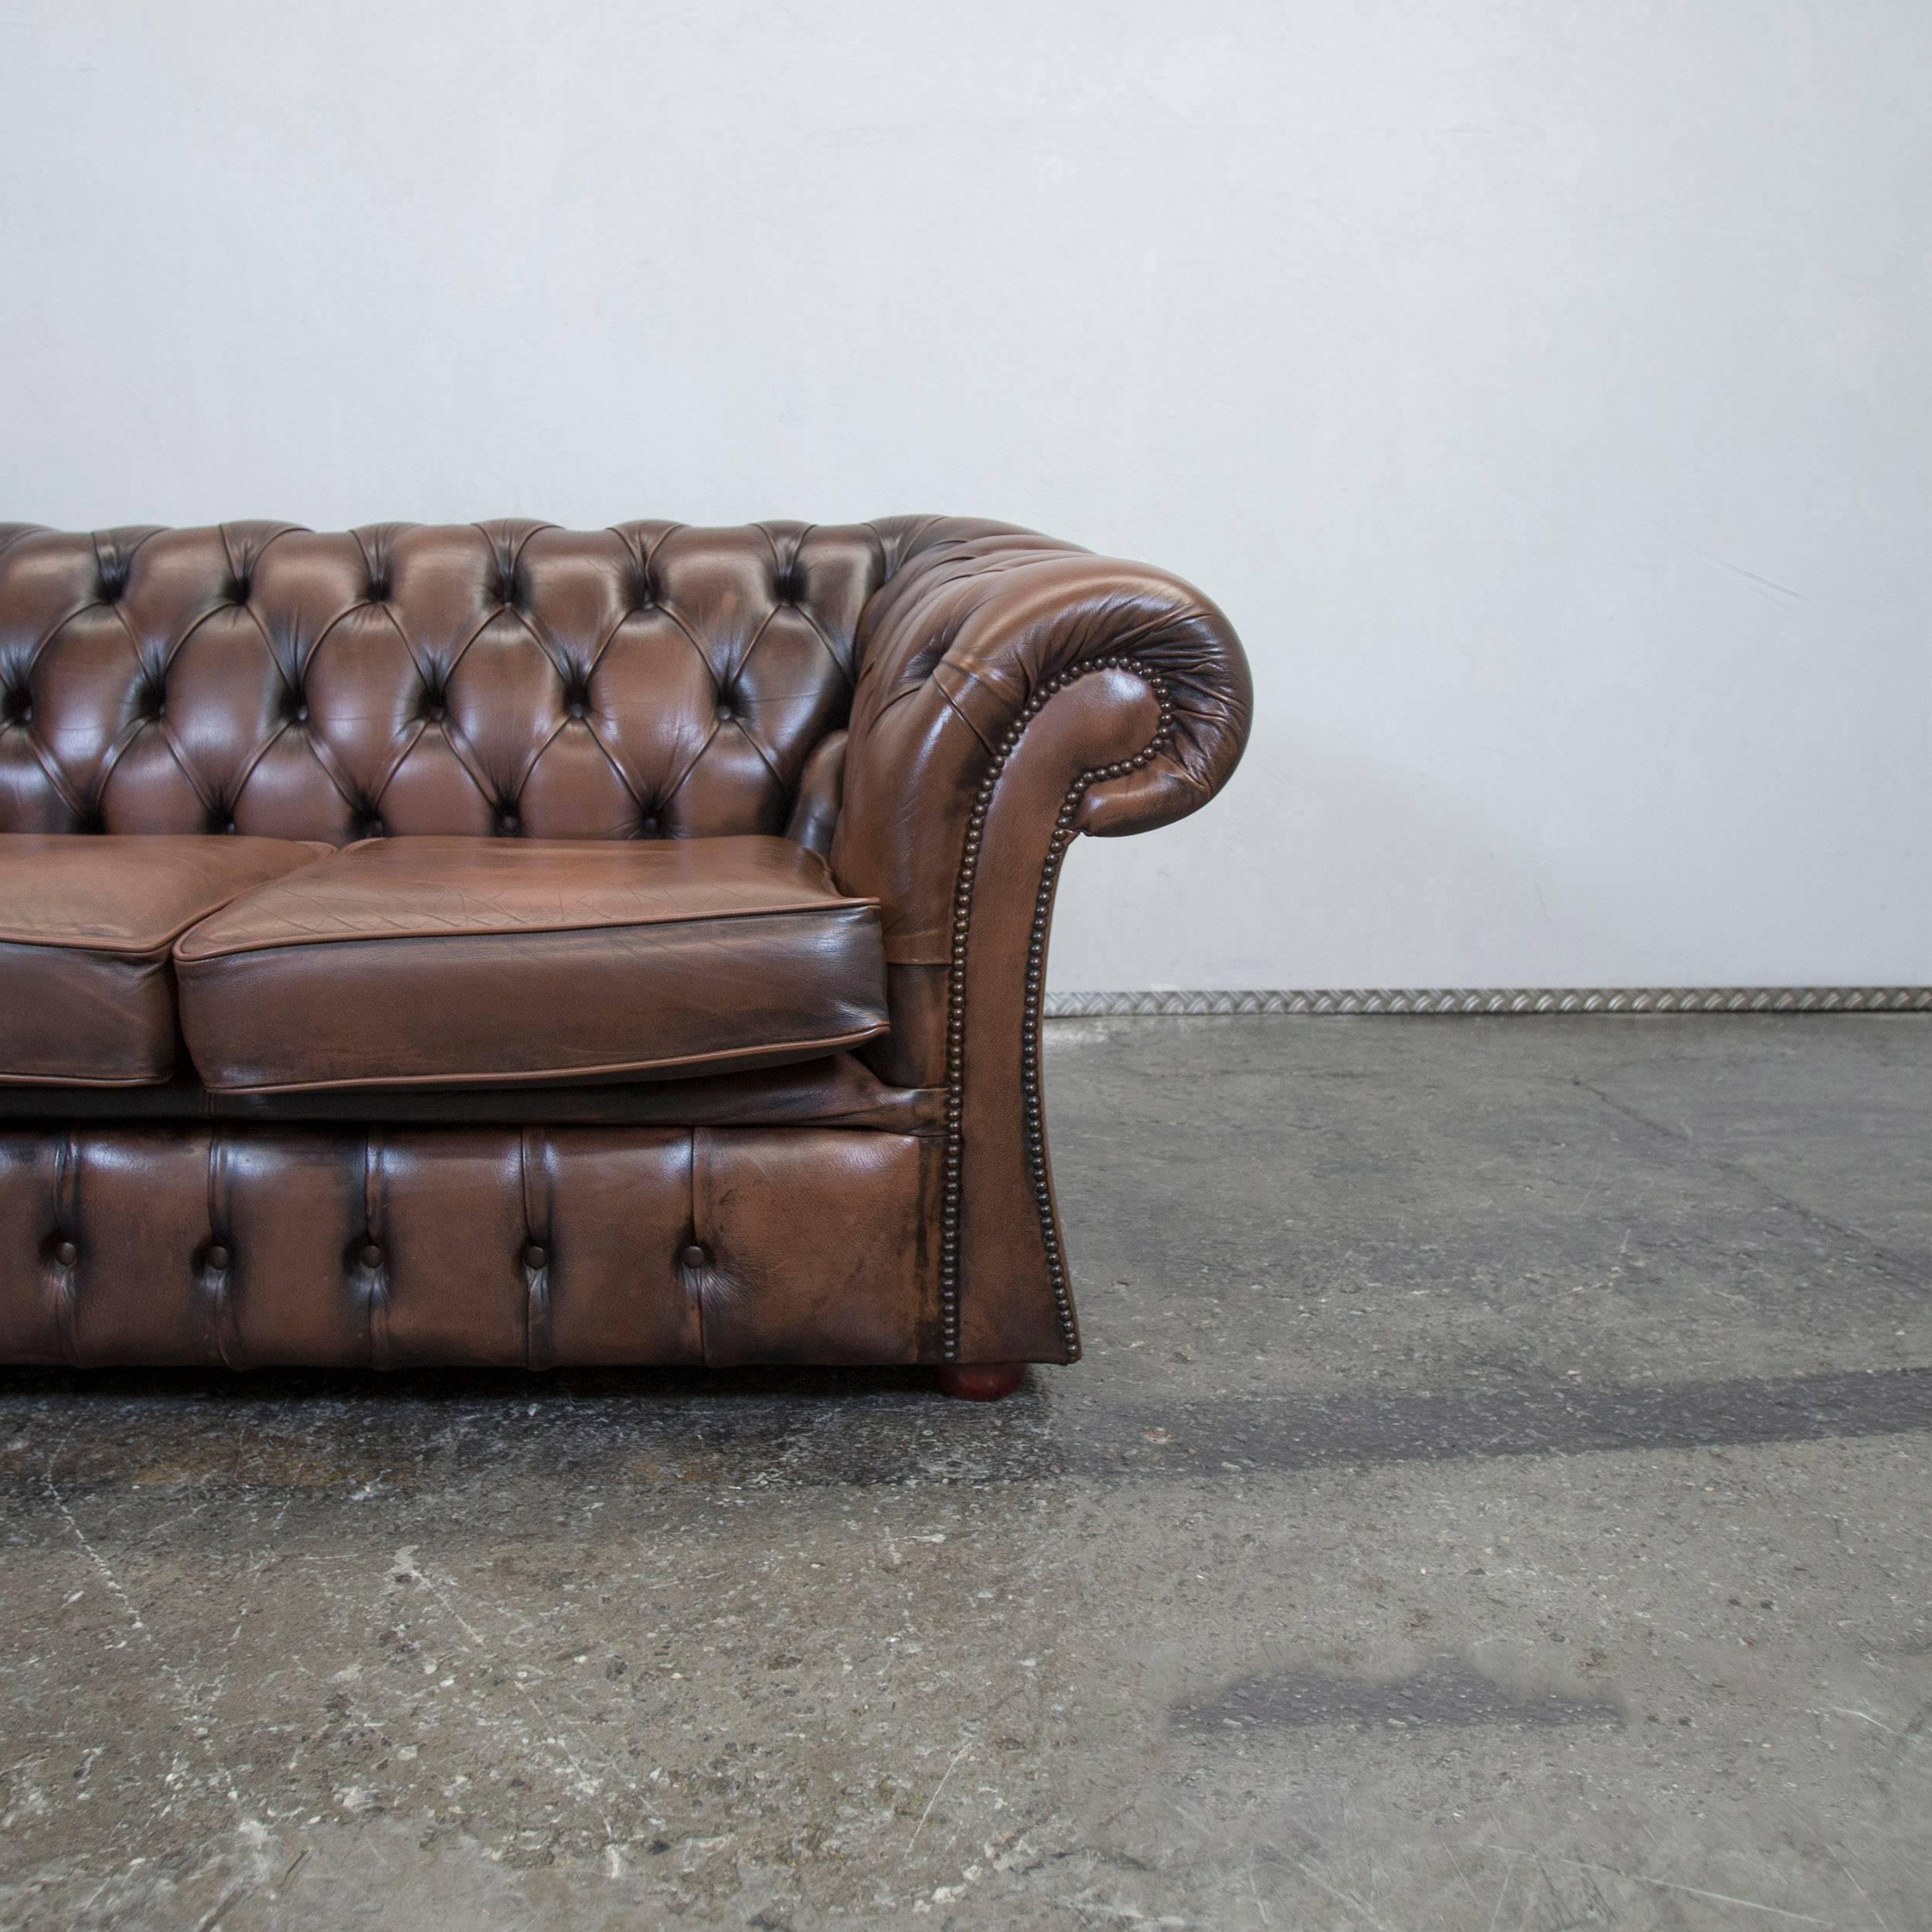 British Chesterfield Leather Sofa Brown Two-Seat Couch Retro Vintage